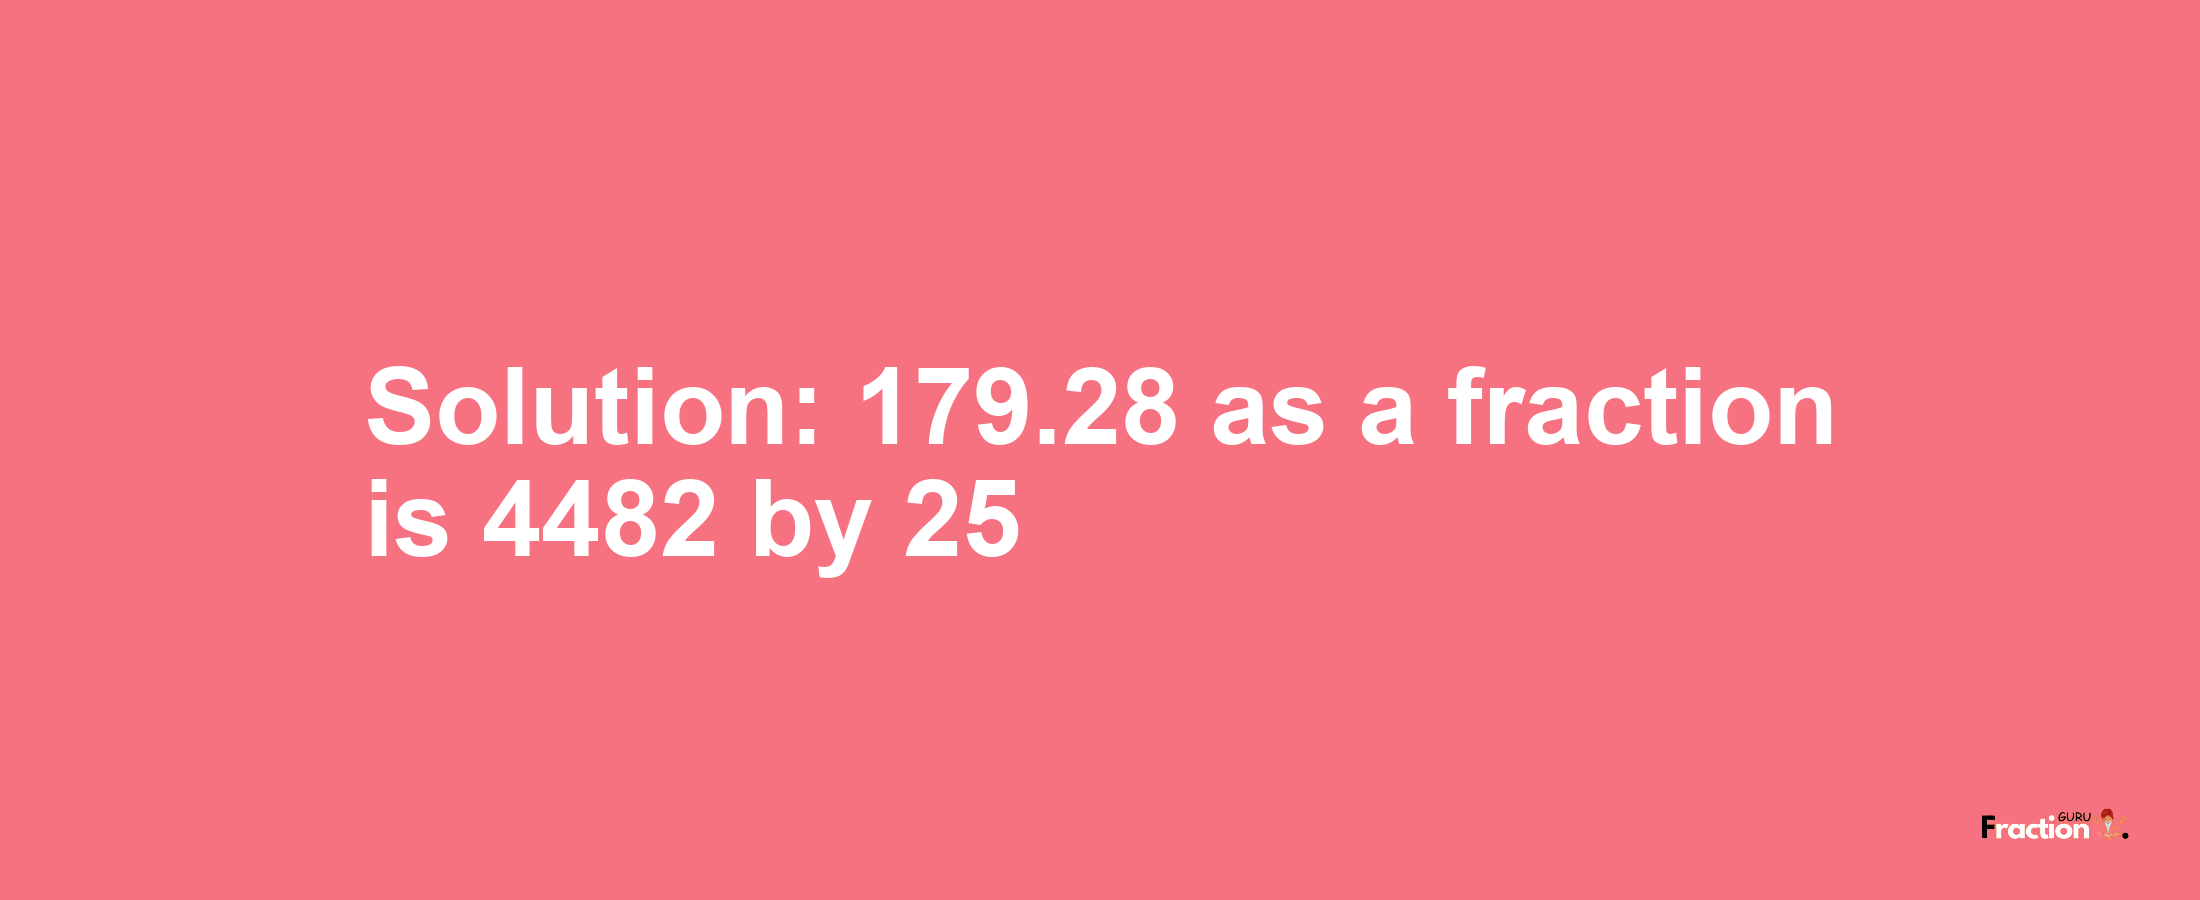 Solution:179.28 as a fraction is 4482/25